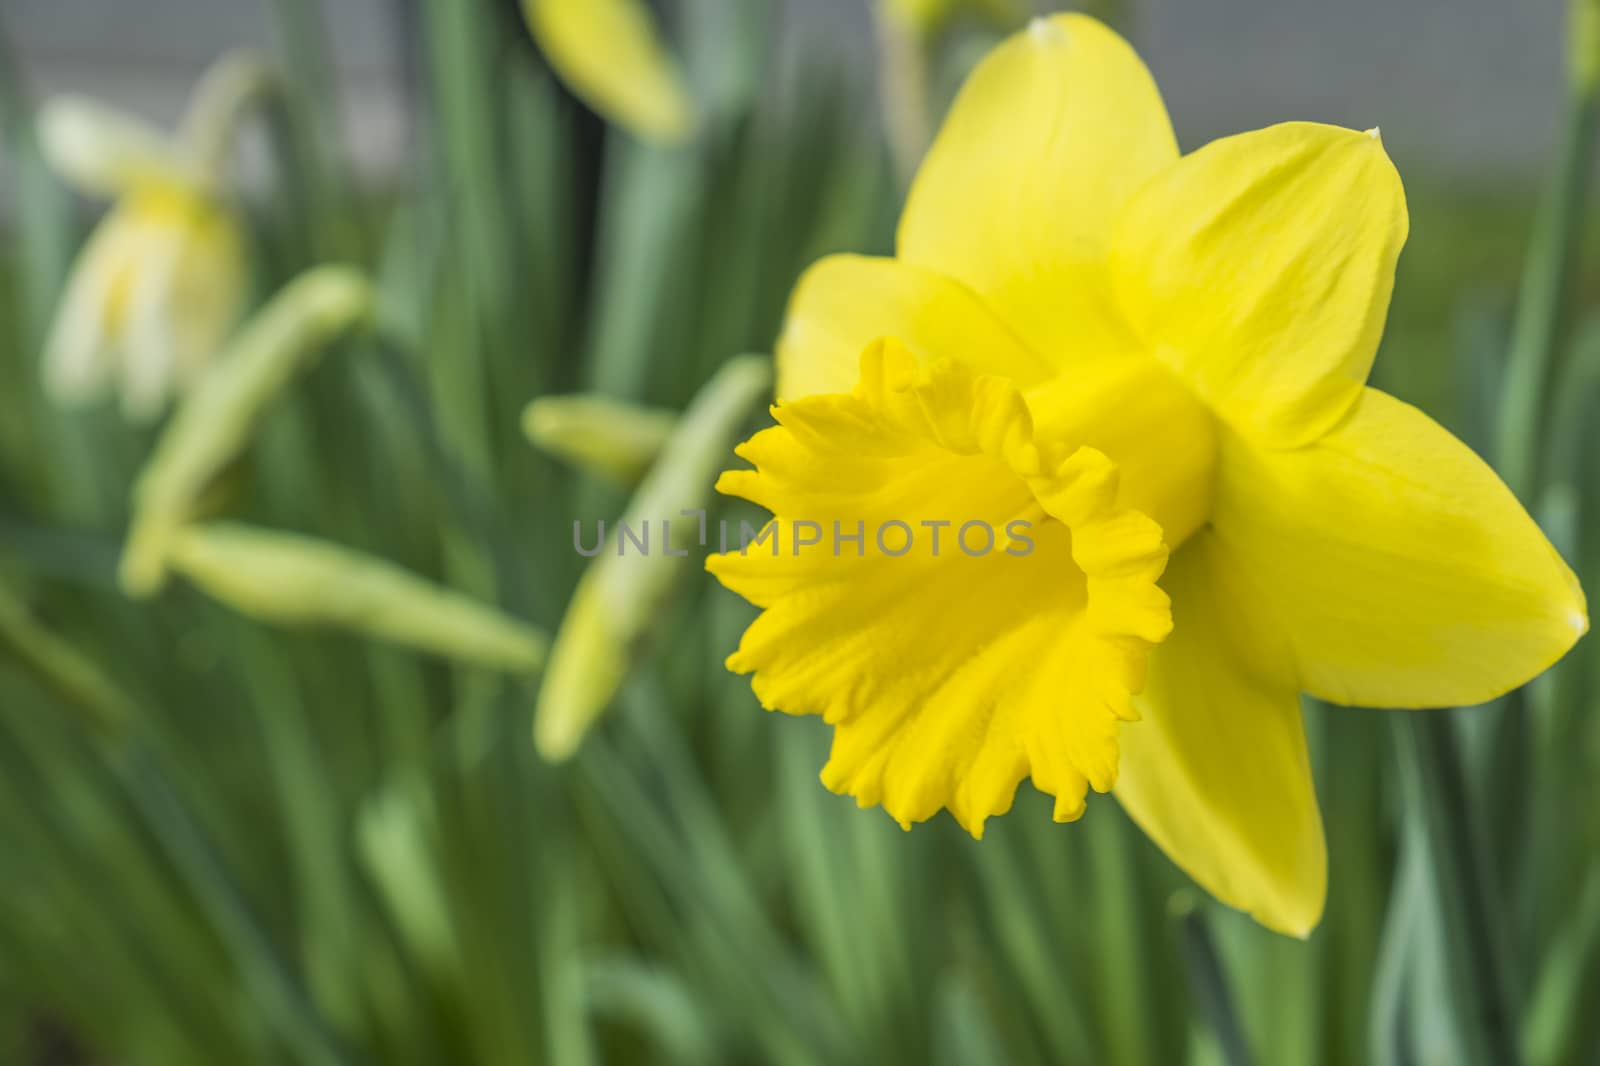 yellow daffodil flower growing in spring time